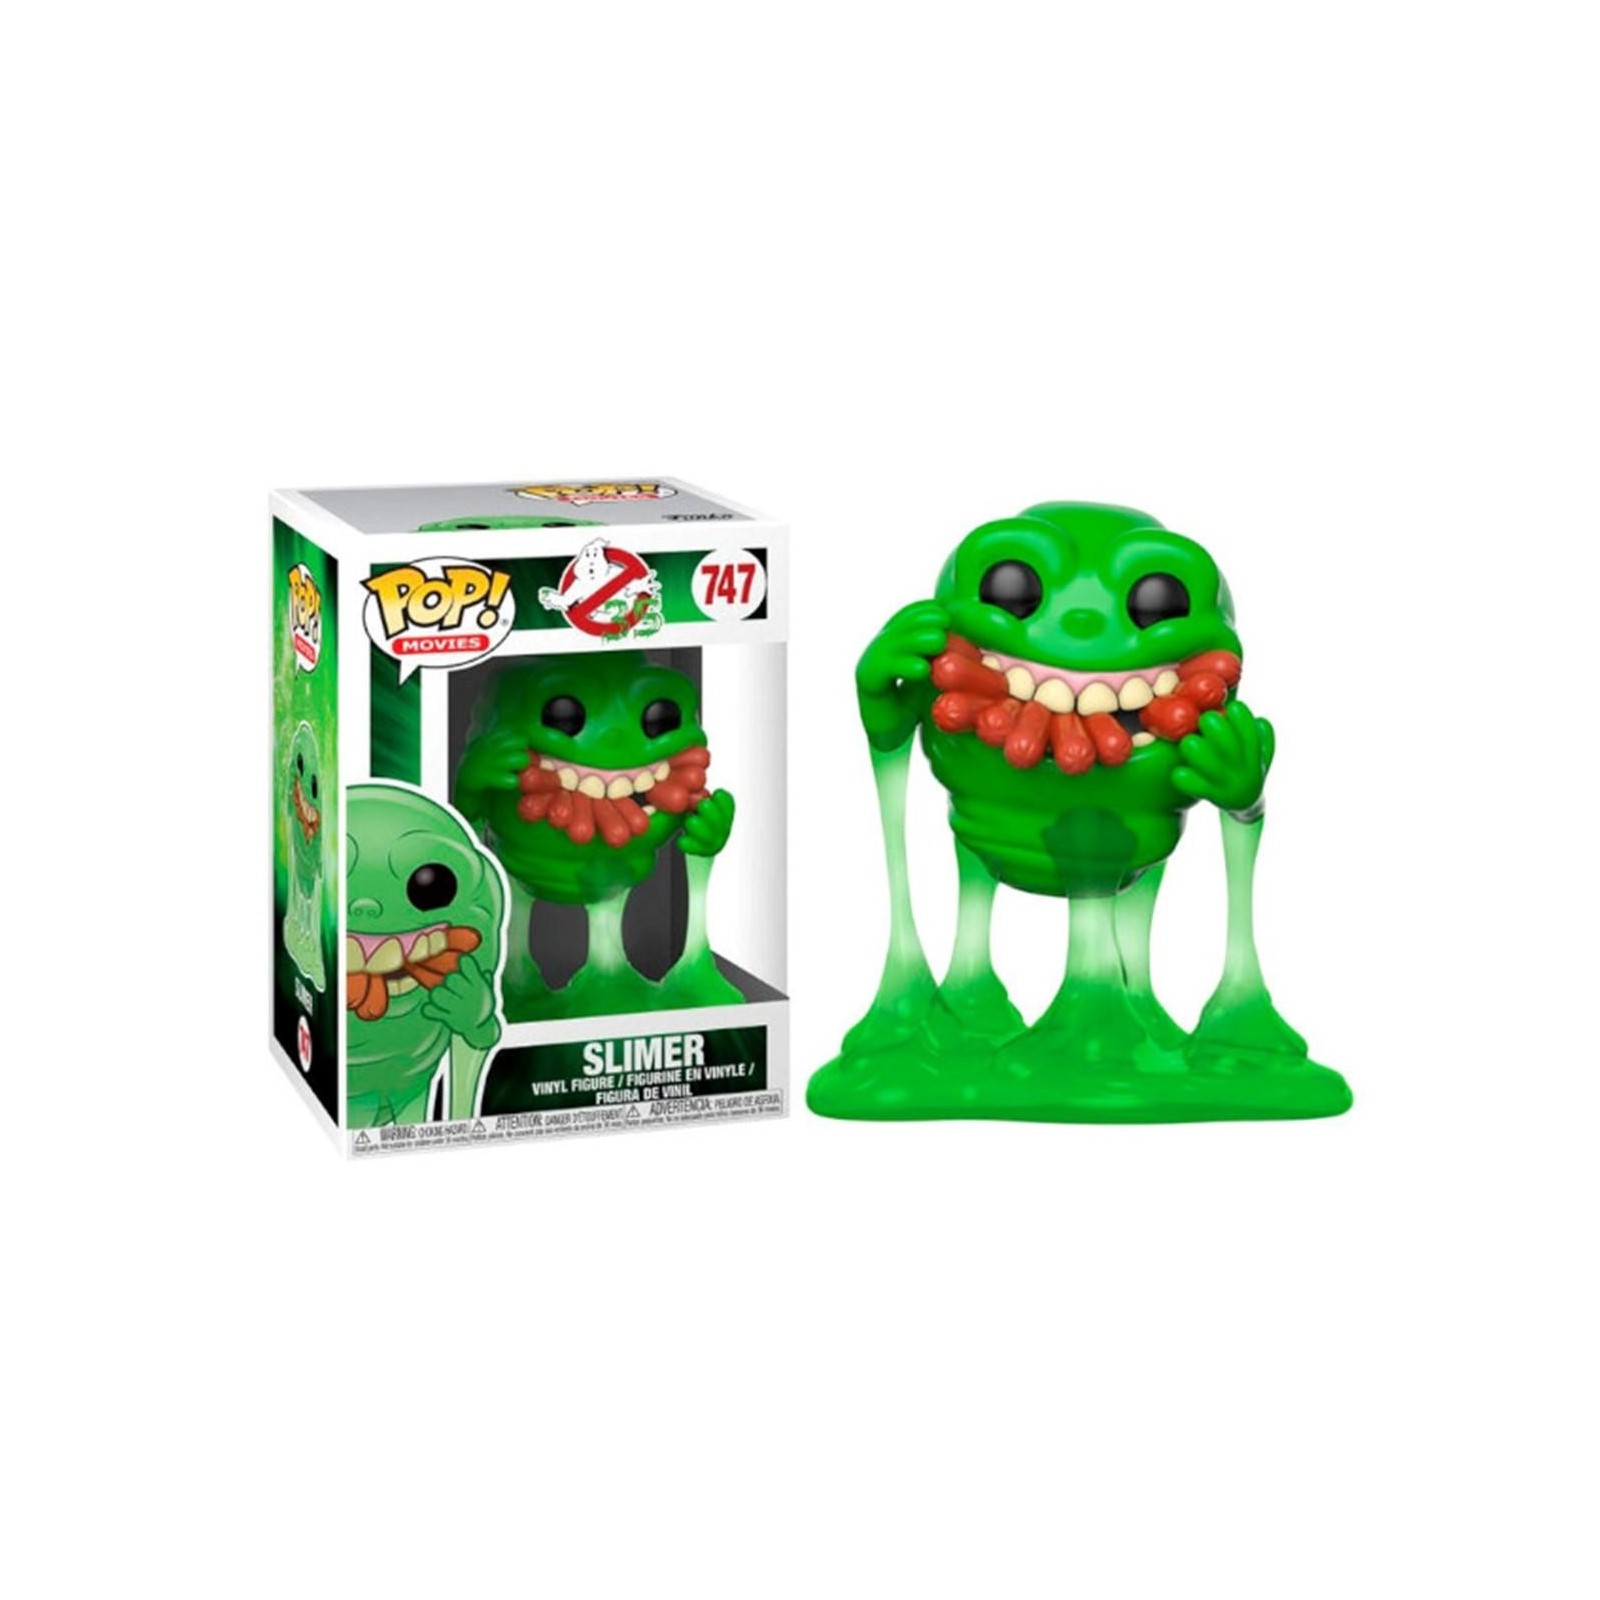 Figura Funko Pop Ghostbusters Slimer With Hot Dogs